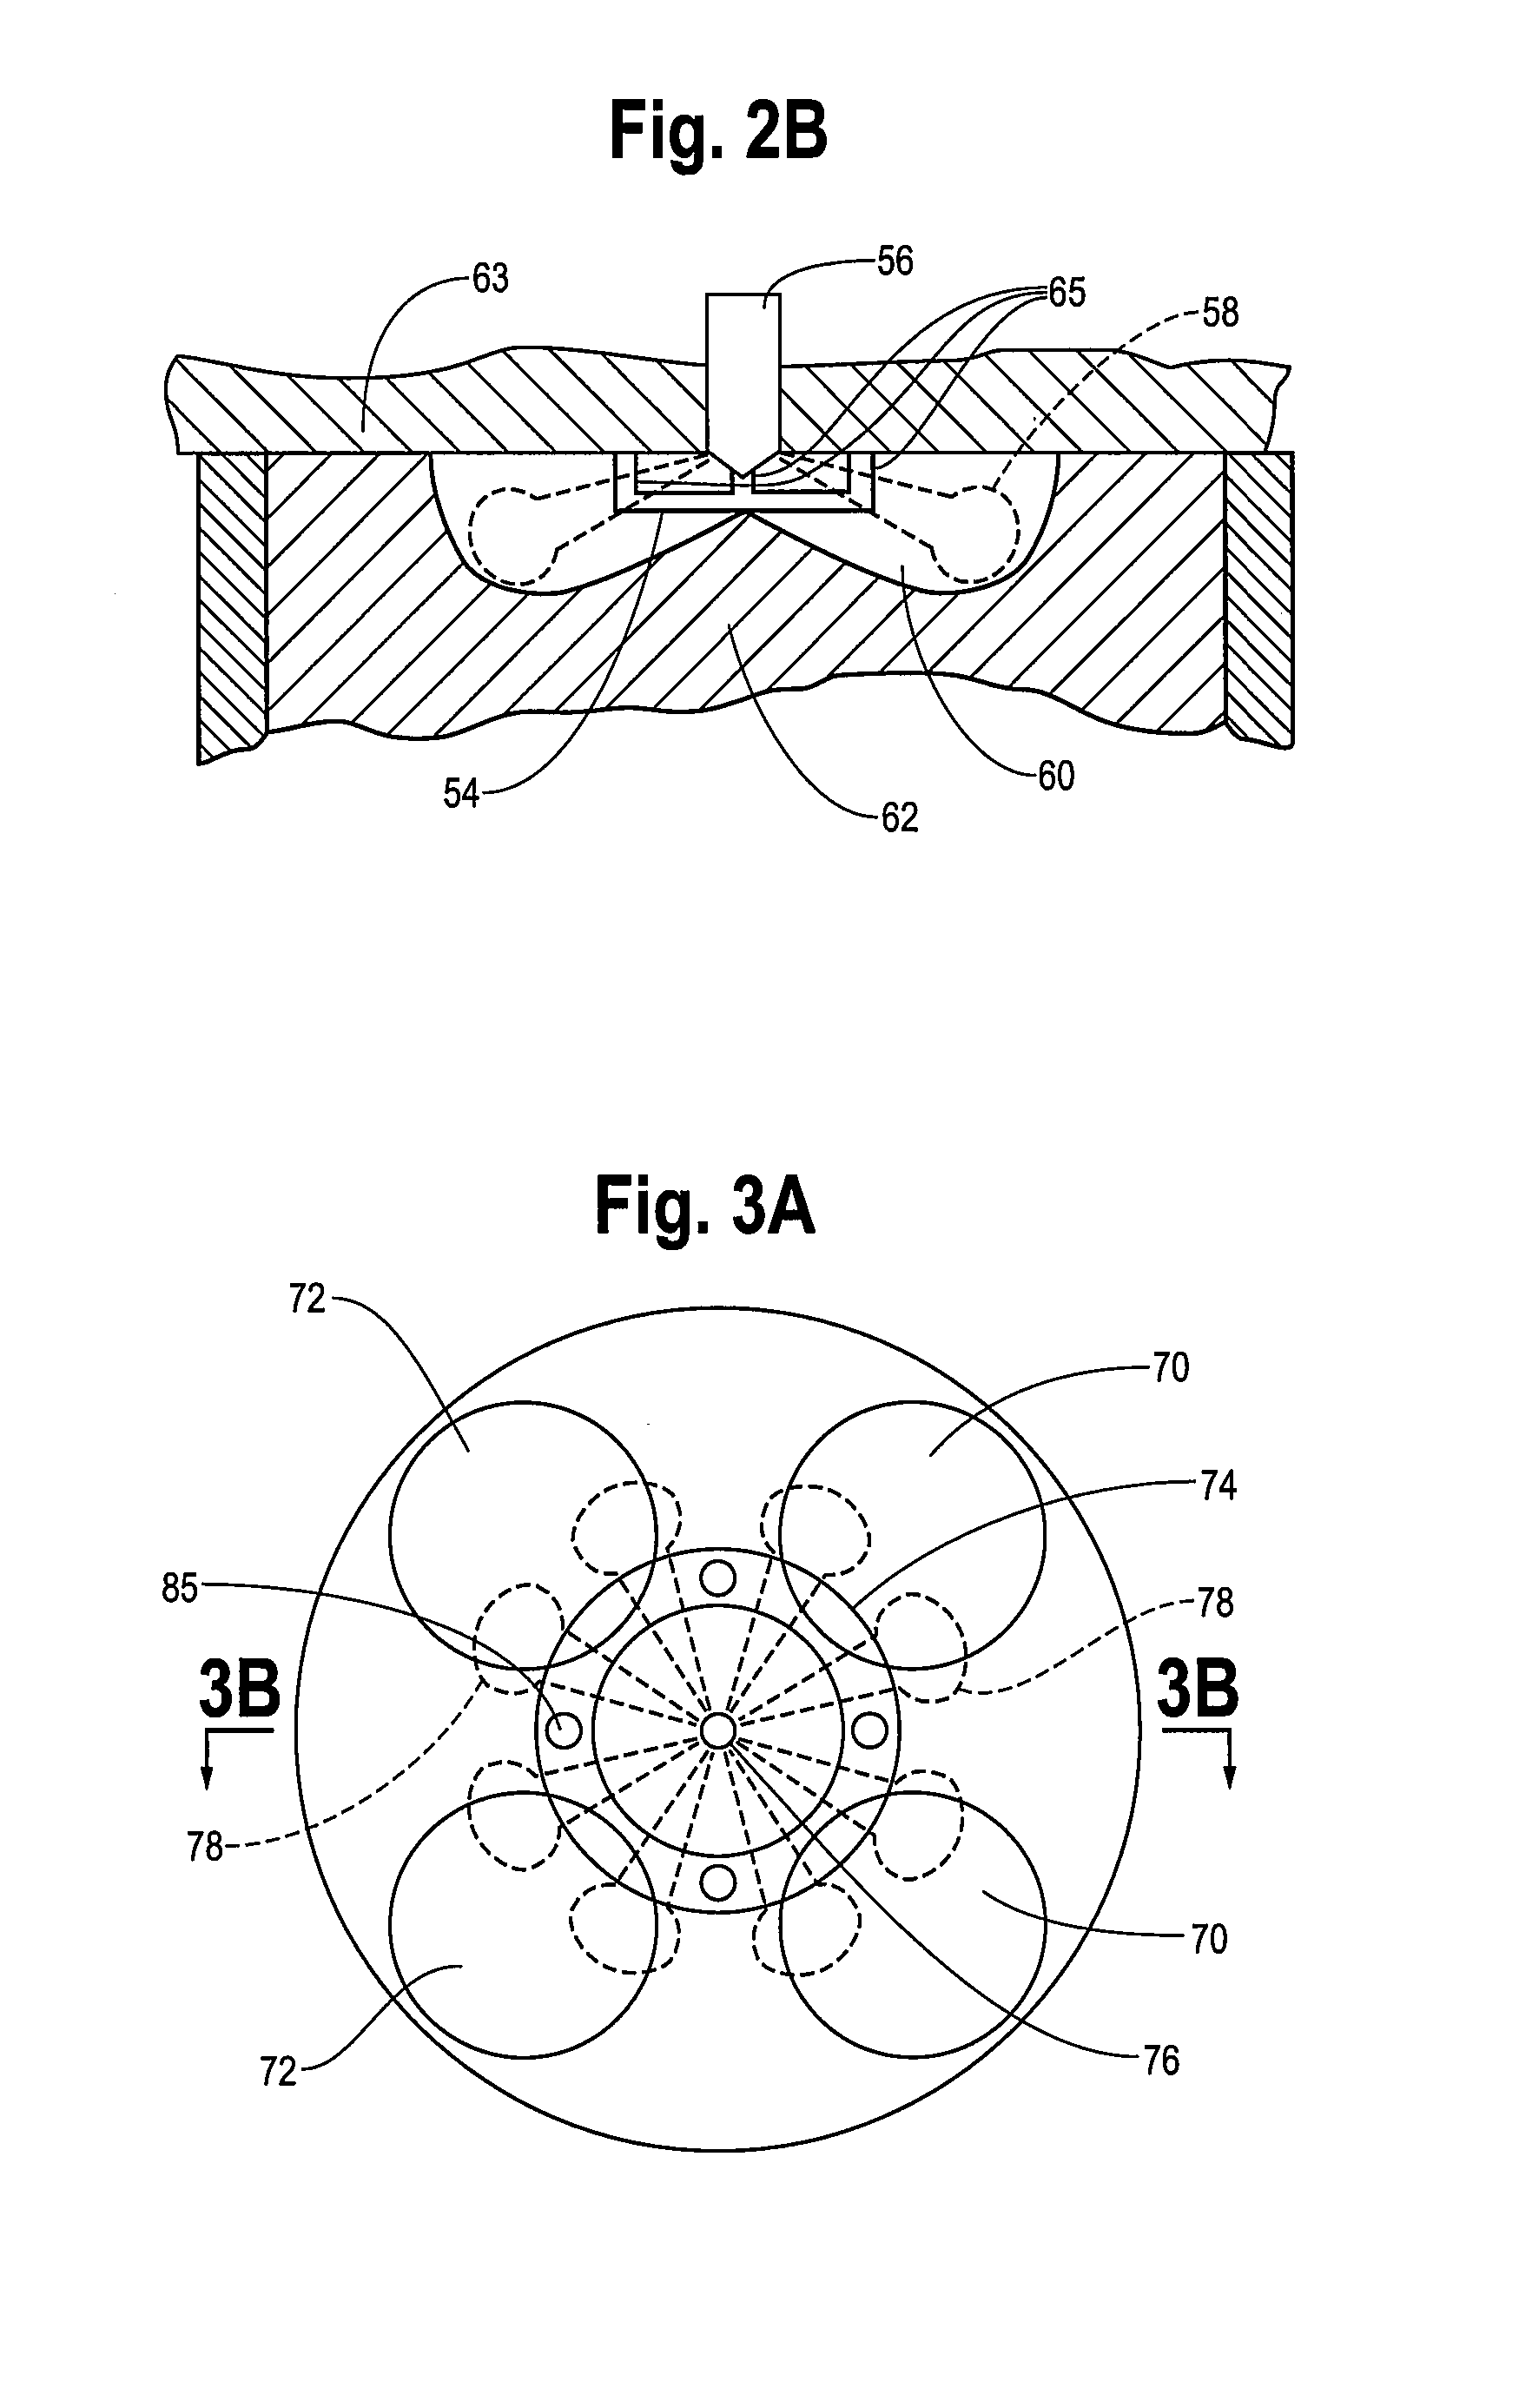 Direct injection combustion chamber geometry